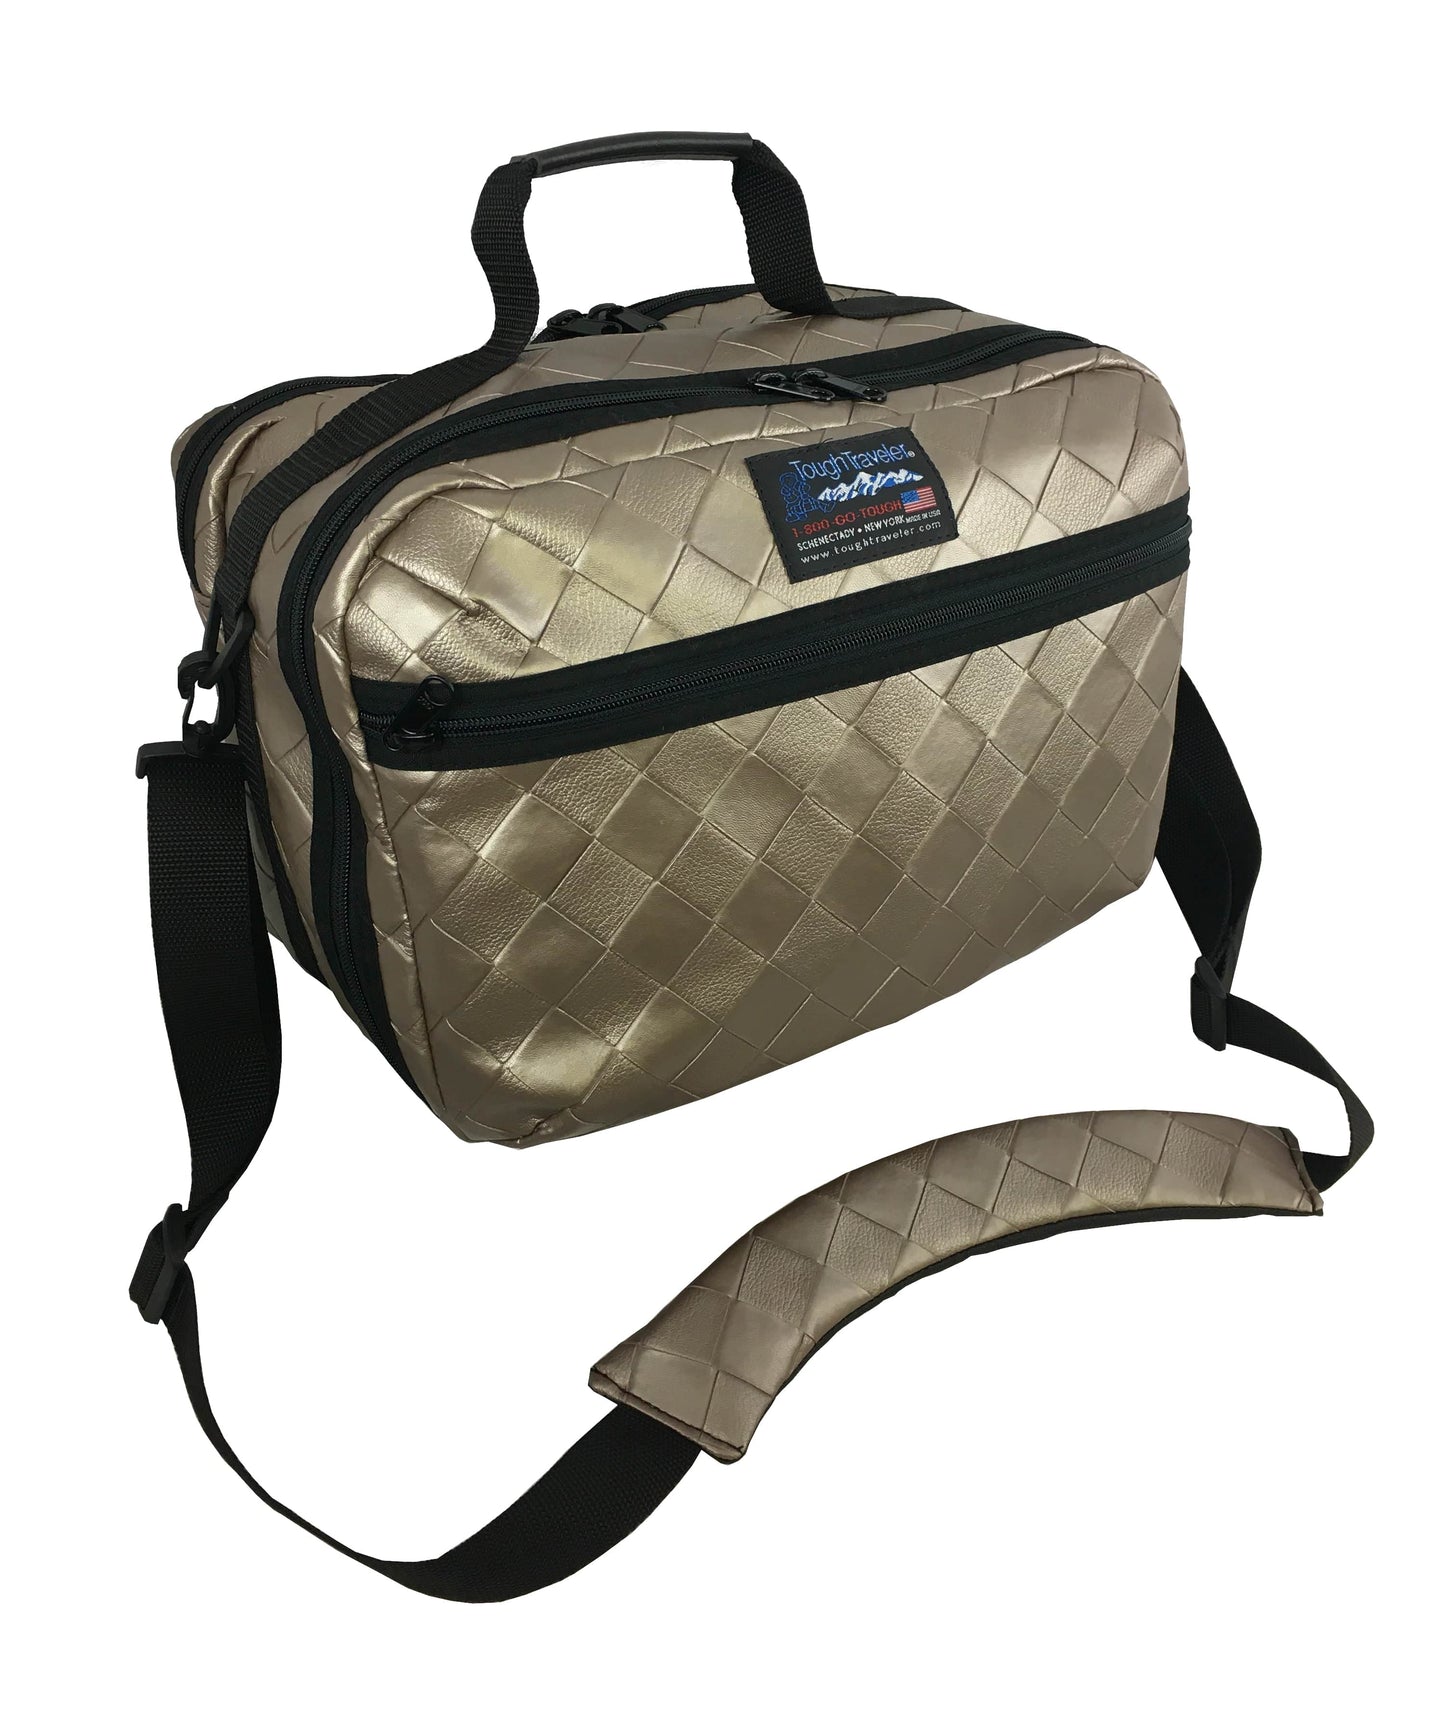 Made in USA DARTER Carry-on Luggage